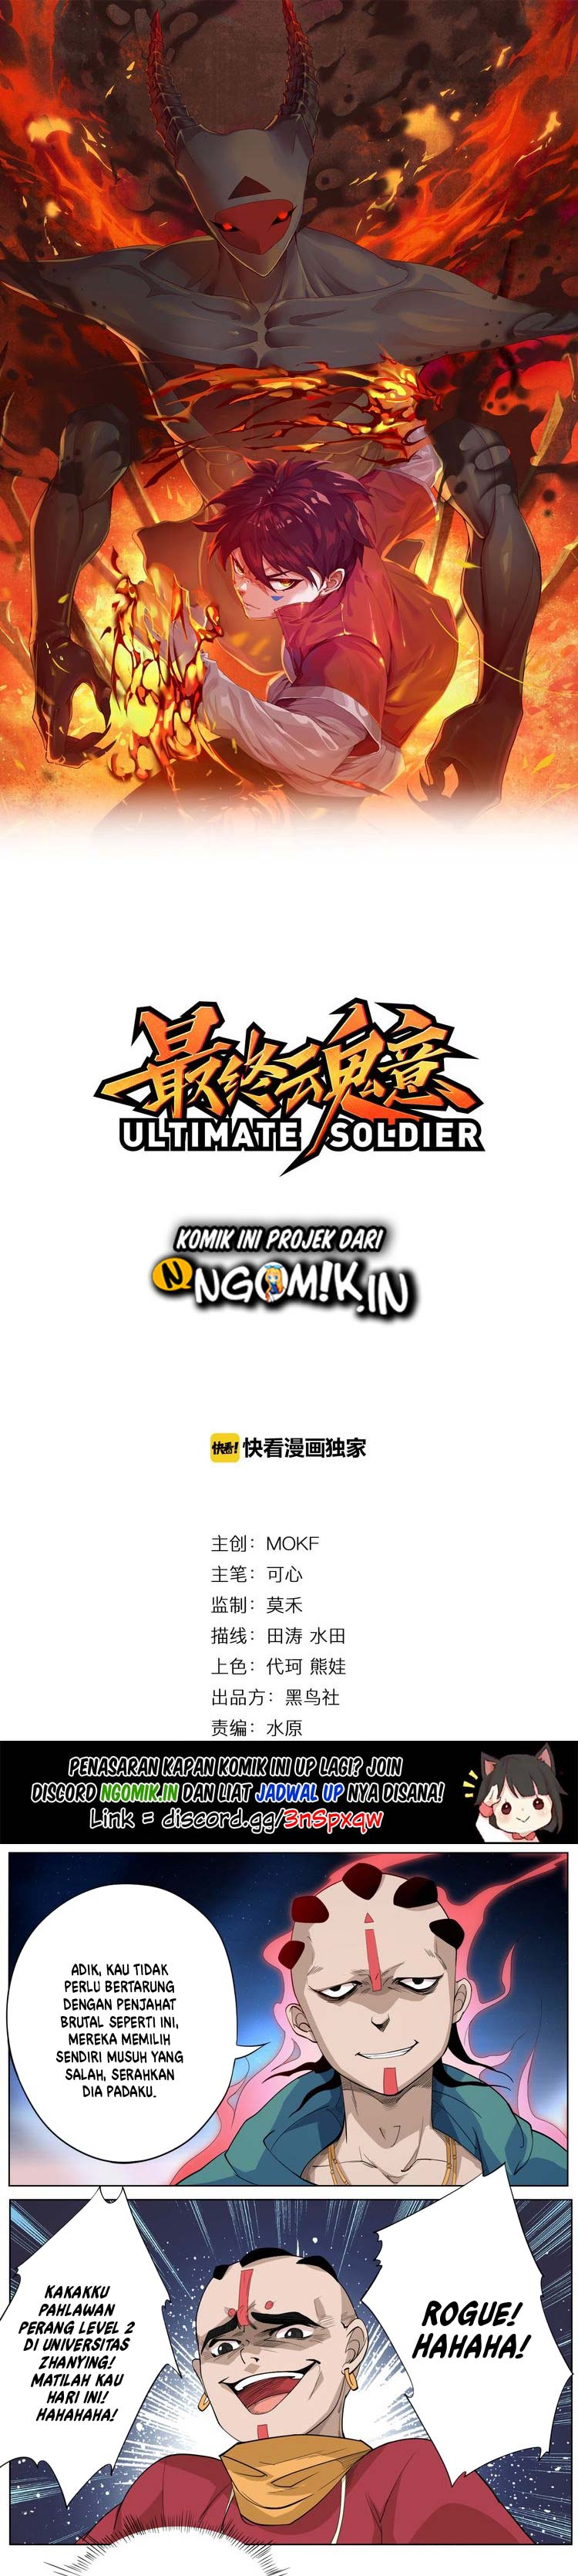 Ultimate Soldier Chapter 2